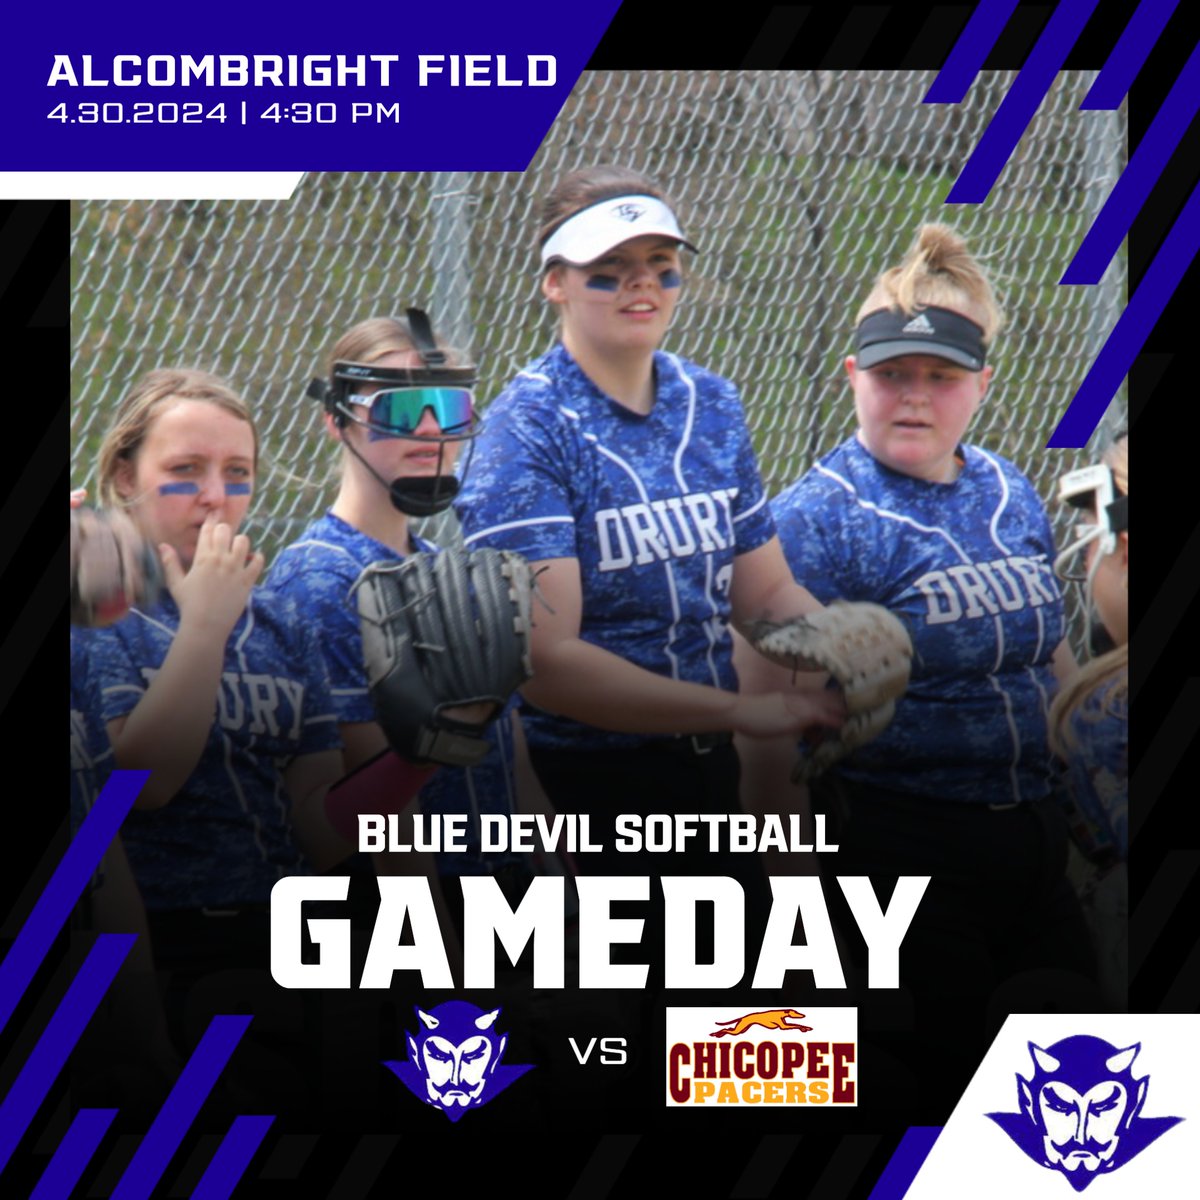 Softball seeks second straight win this afternoon when they host Chicopee at 4:30pm, both Varsity and JV in action!  Good Luck and let's go Blue Devils!

Image courtesy of @iBerkSports